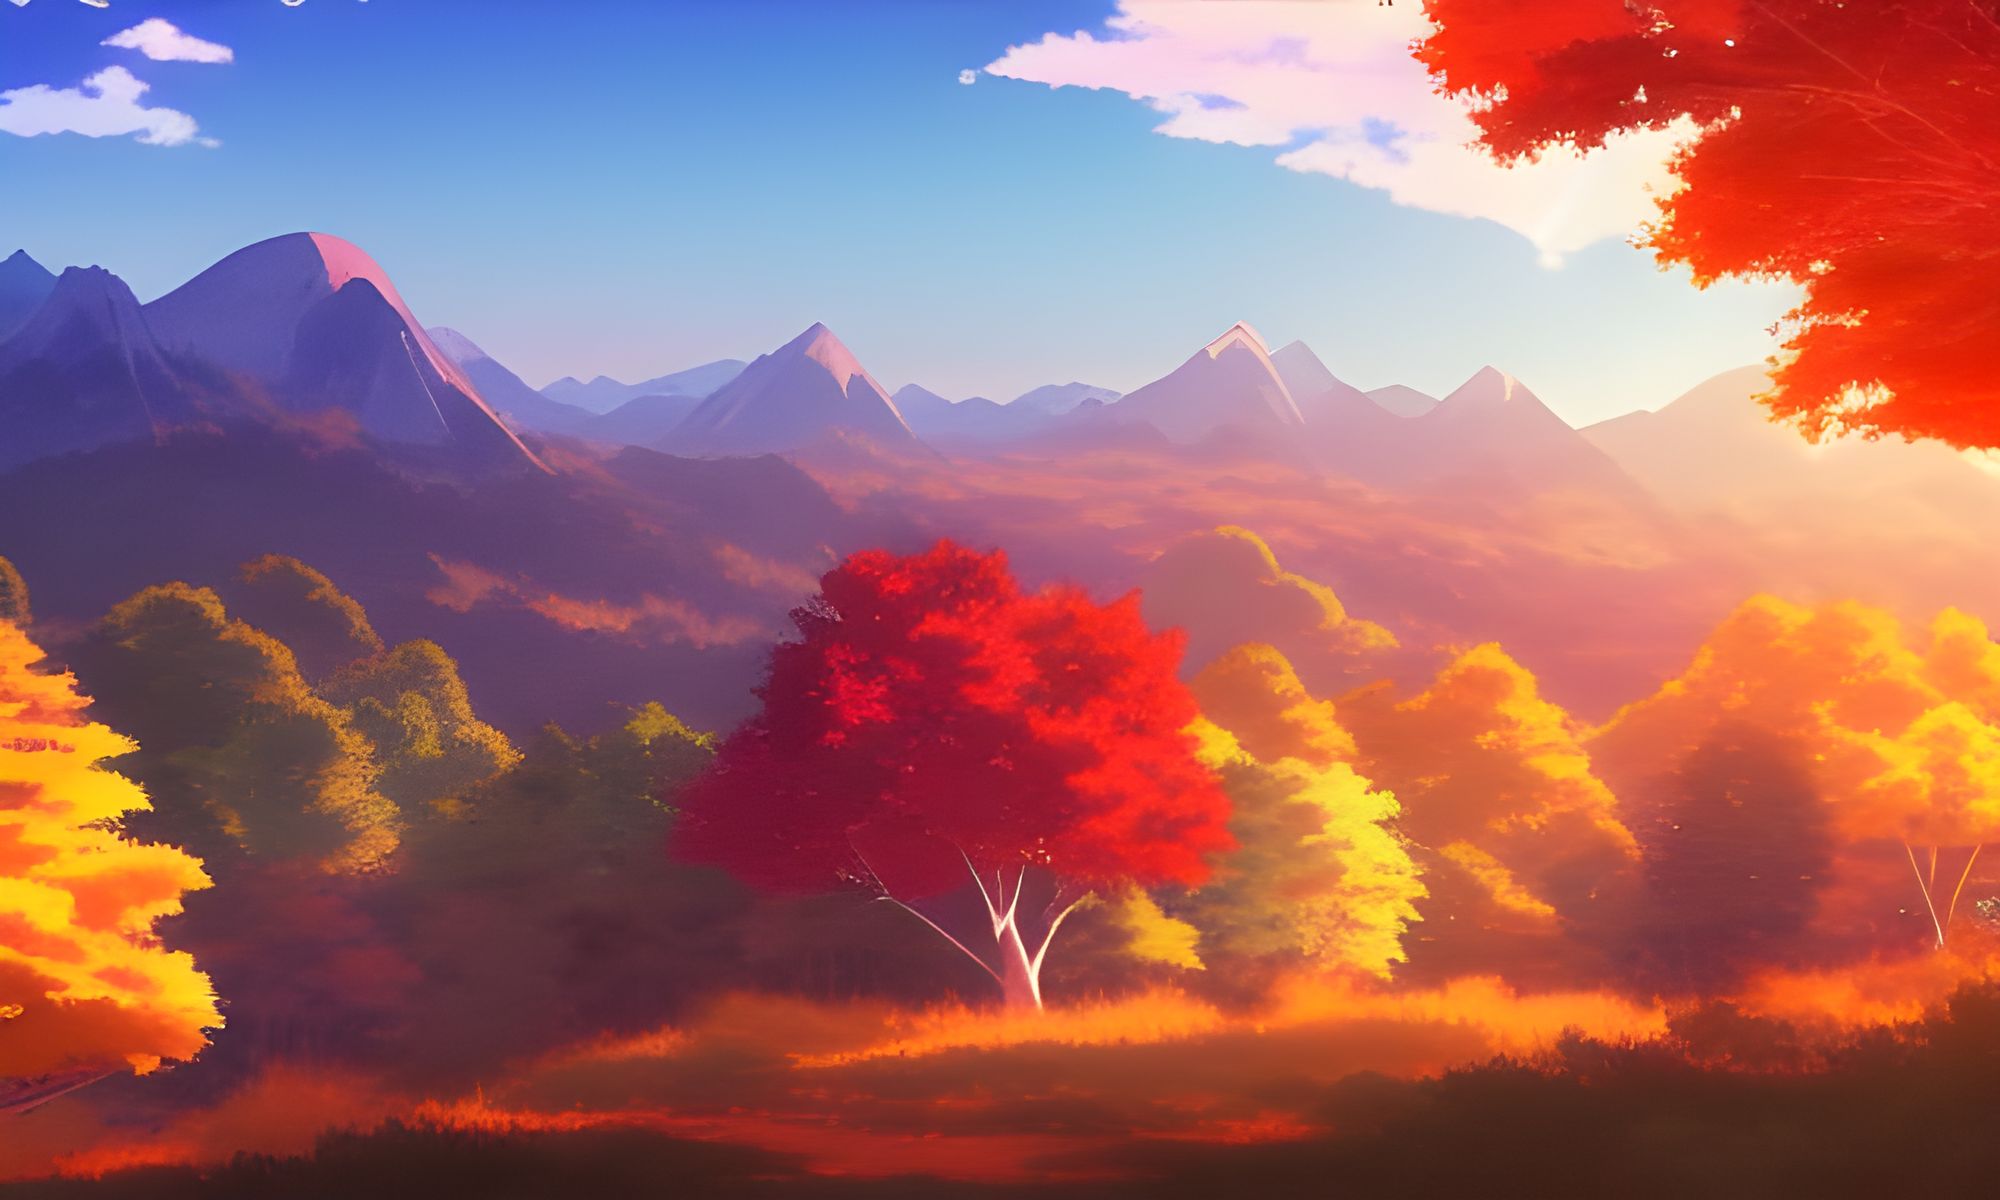 Aggregate more than 75 anime mountain wallpaper best - awesomeenglish.edu.vn